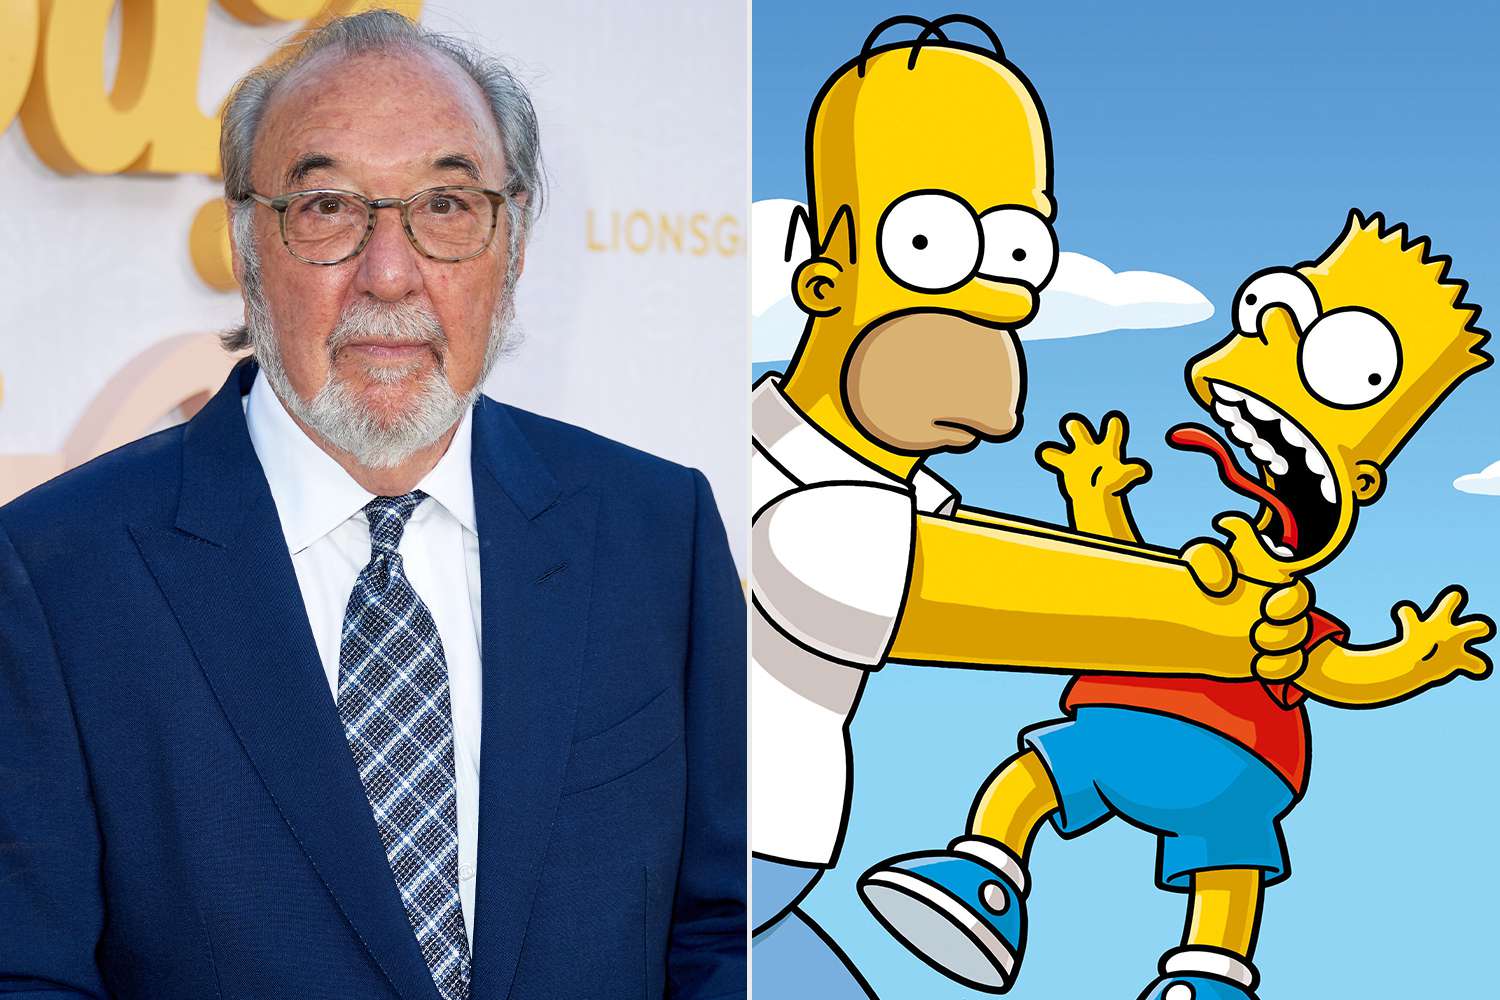 Homer Simpson Will Continue To Choke Bart On ‘Simpsons’ Confirms James L. Brooks